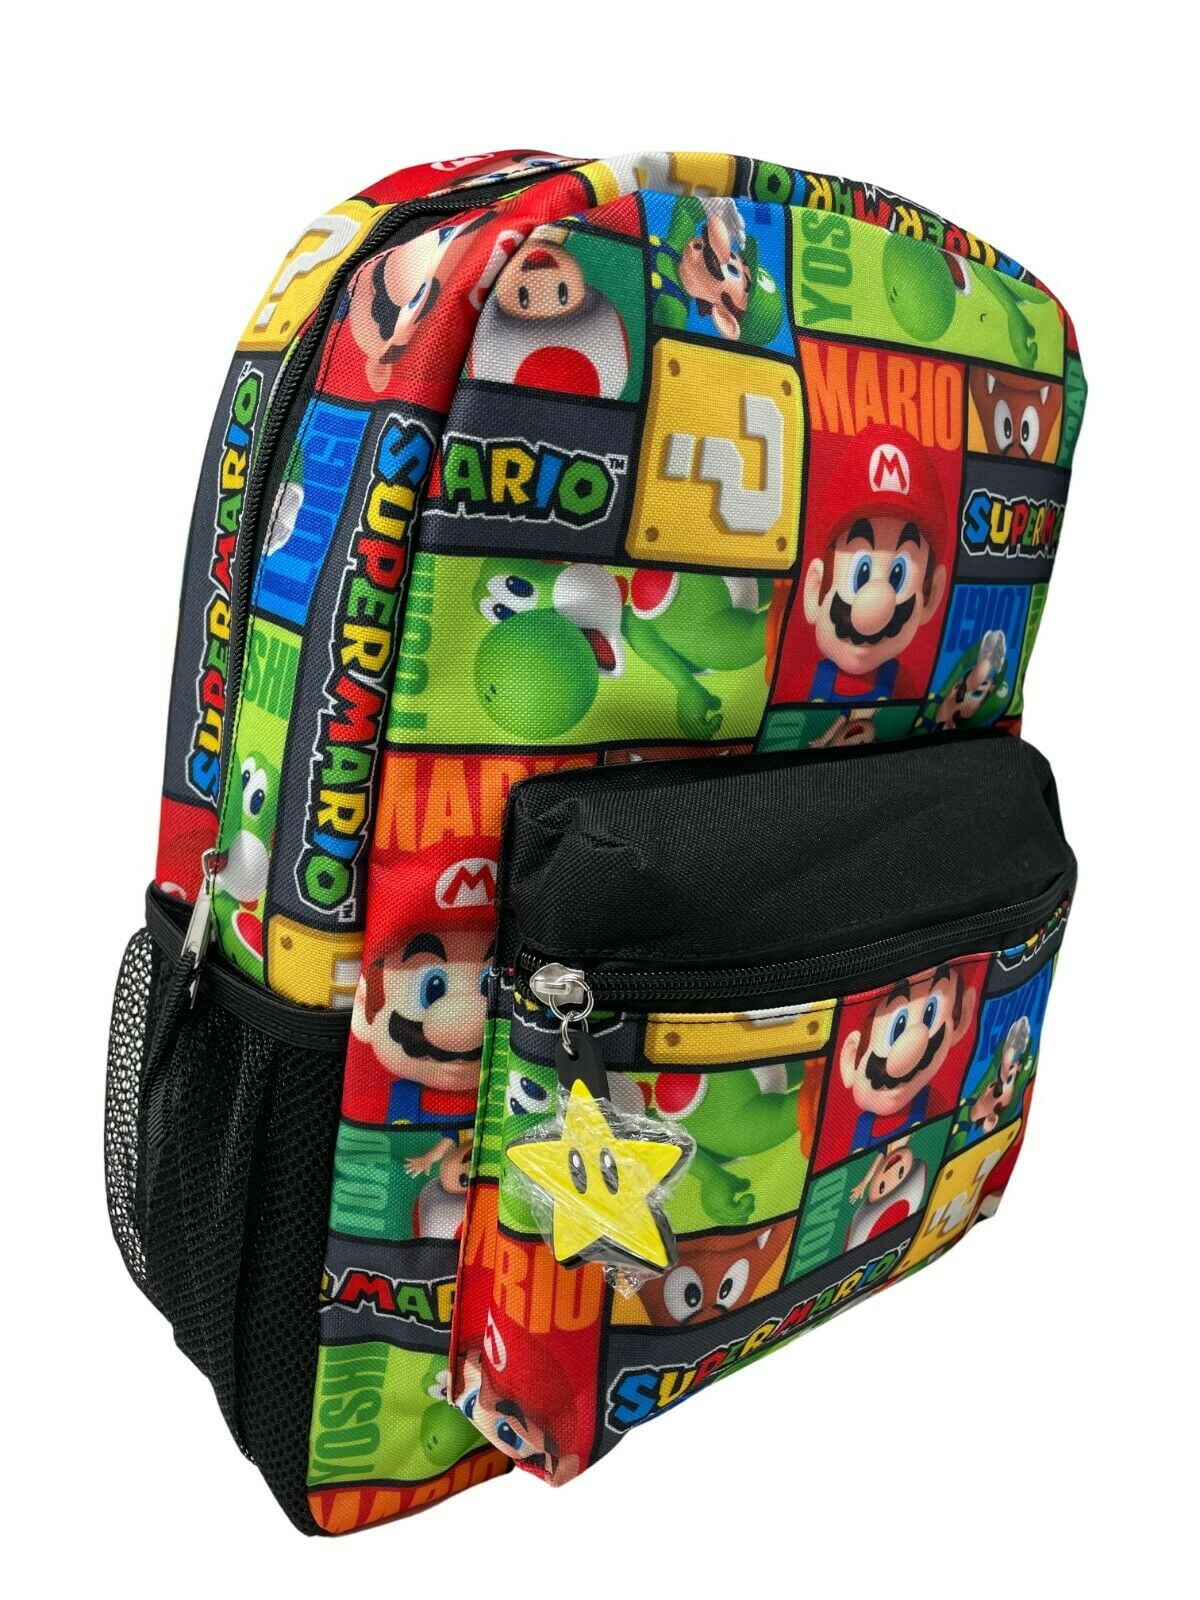 Supper Mario Odyssey School Backpack Lunch Box Combo Set Green Kids New 